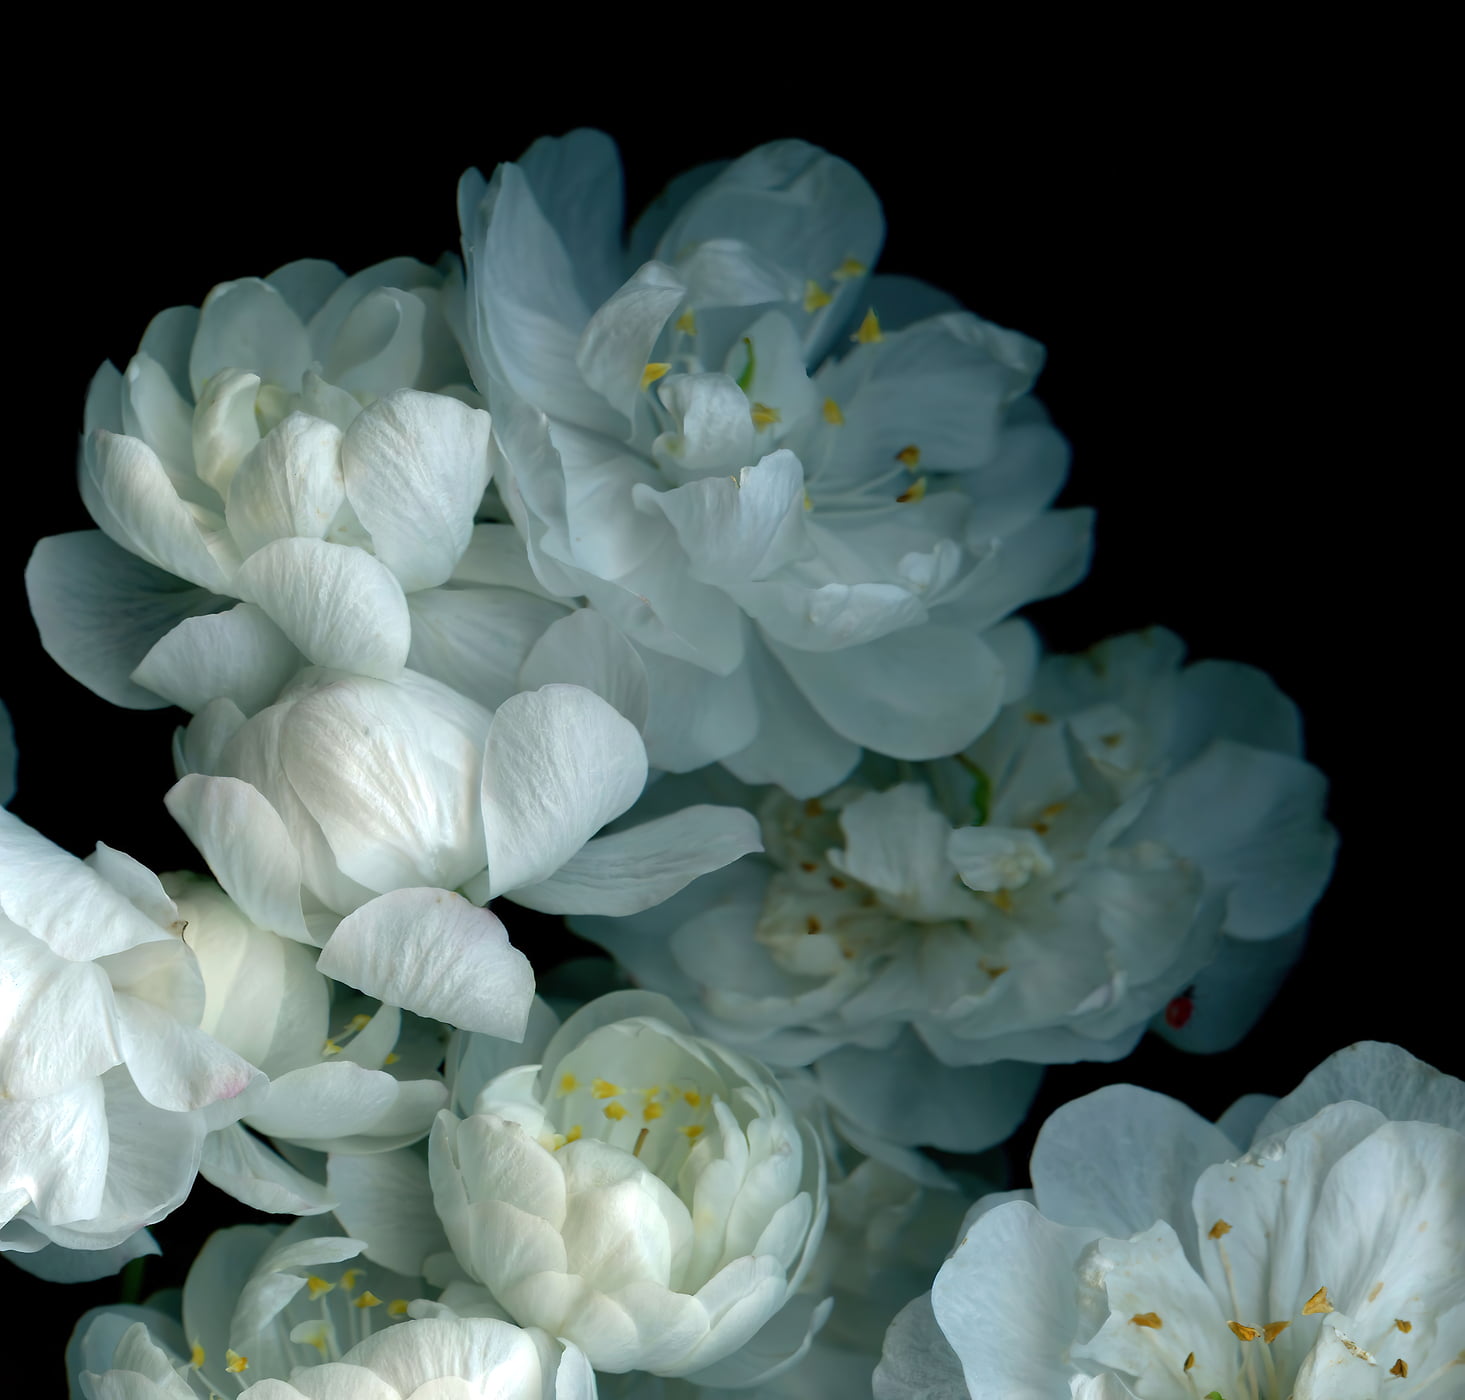 193 megapixels! A very high resolution, large-format VAST photo print of a blossom artwork created by Anja Axelsson.